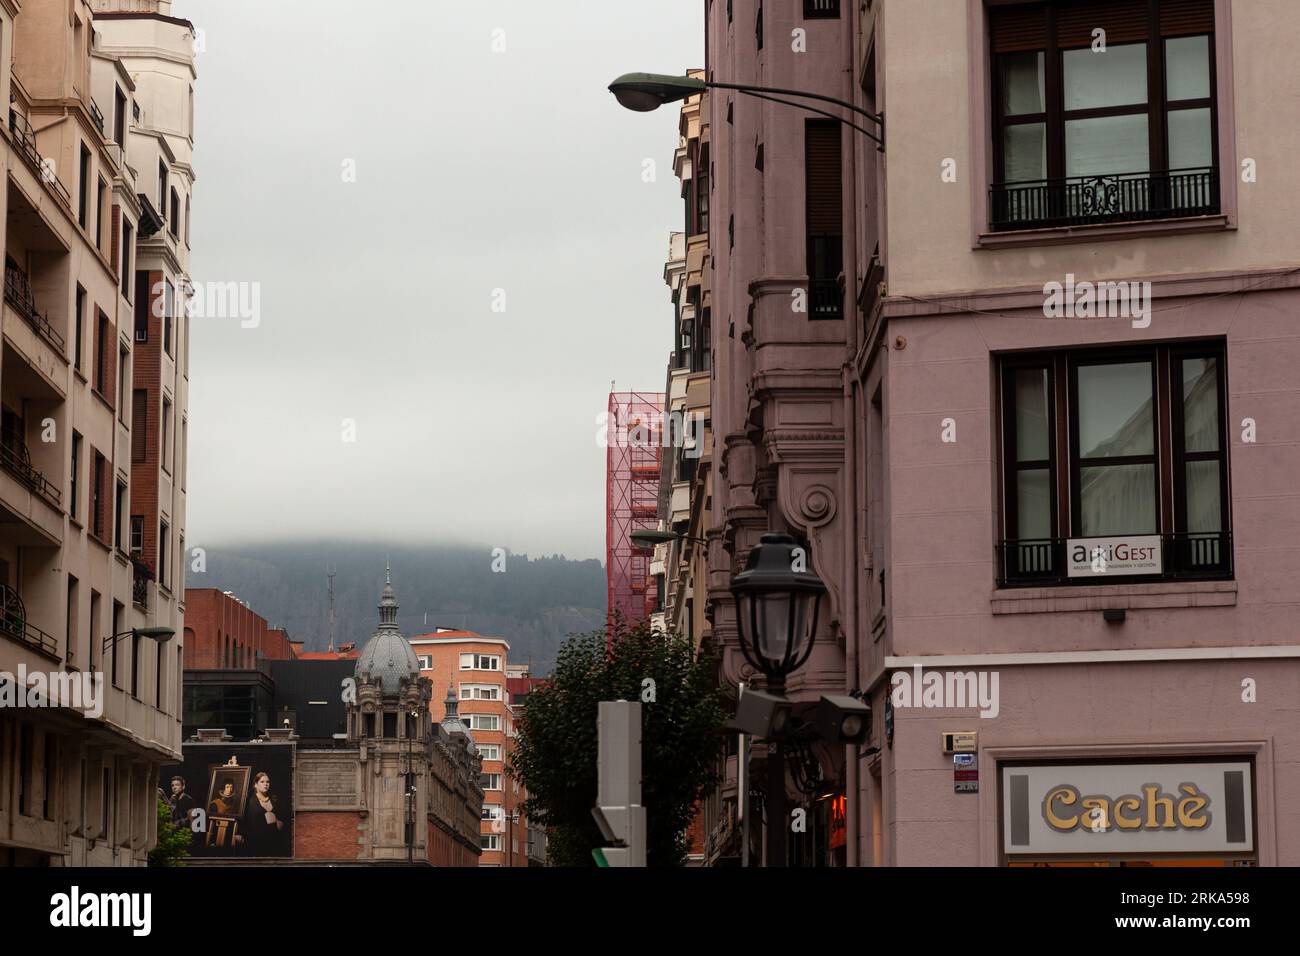 Bilbao, Spain - August 03, 2022: View of the old town of Bilbao on a rainy day, the Azkuna Zentroa on background Stock Photo